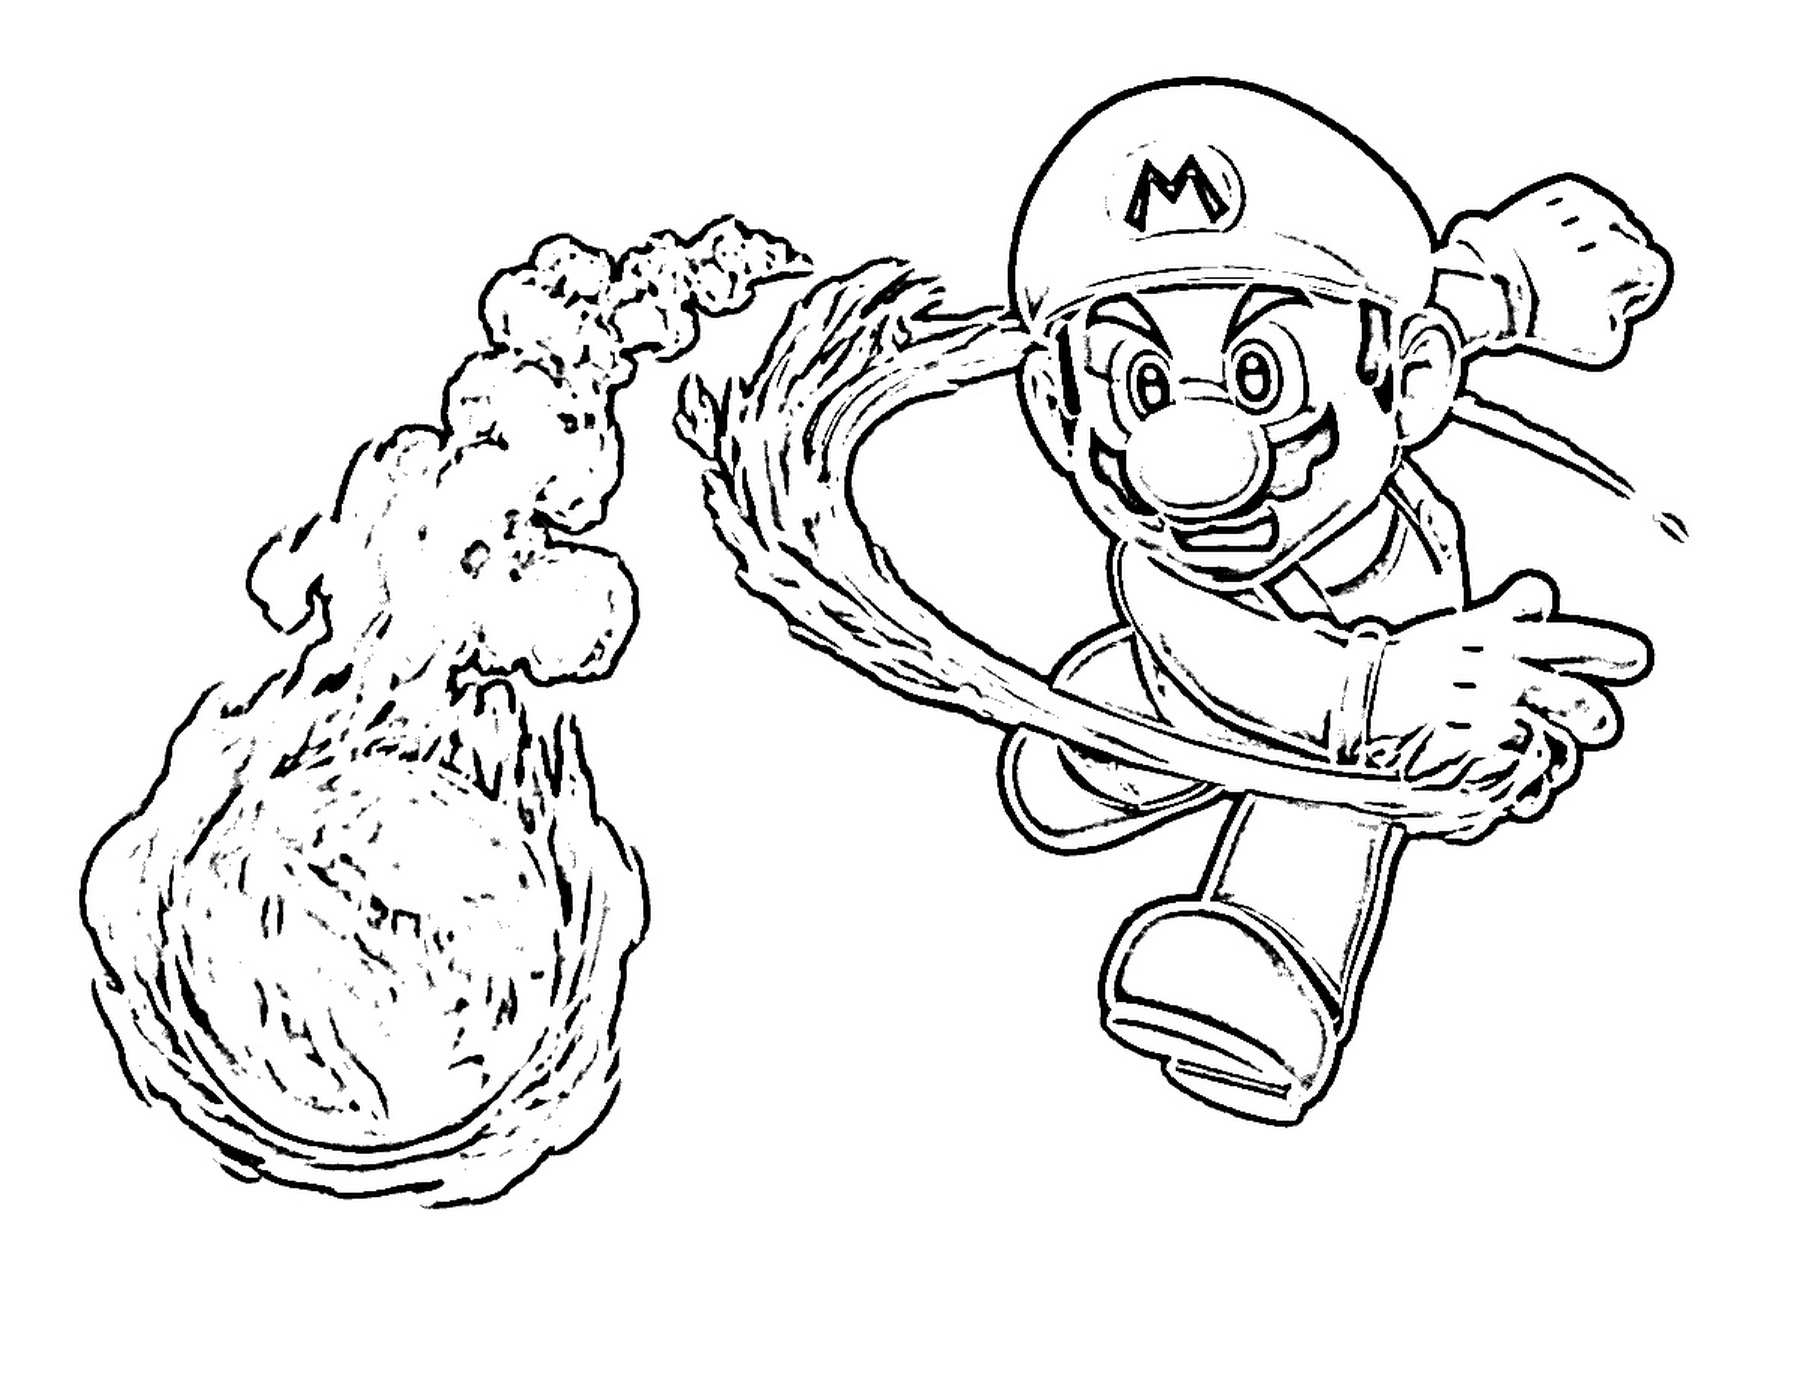 Coloring Pages : Super Mario Bros Coloring Pages At Getcolorings Com - Mario Coloring Pages Free Printable